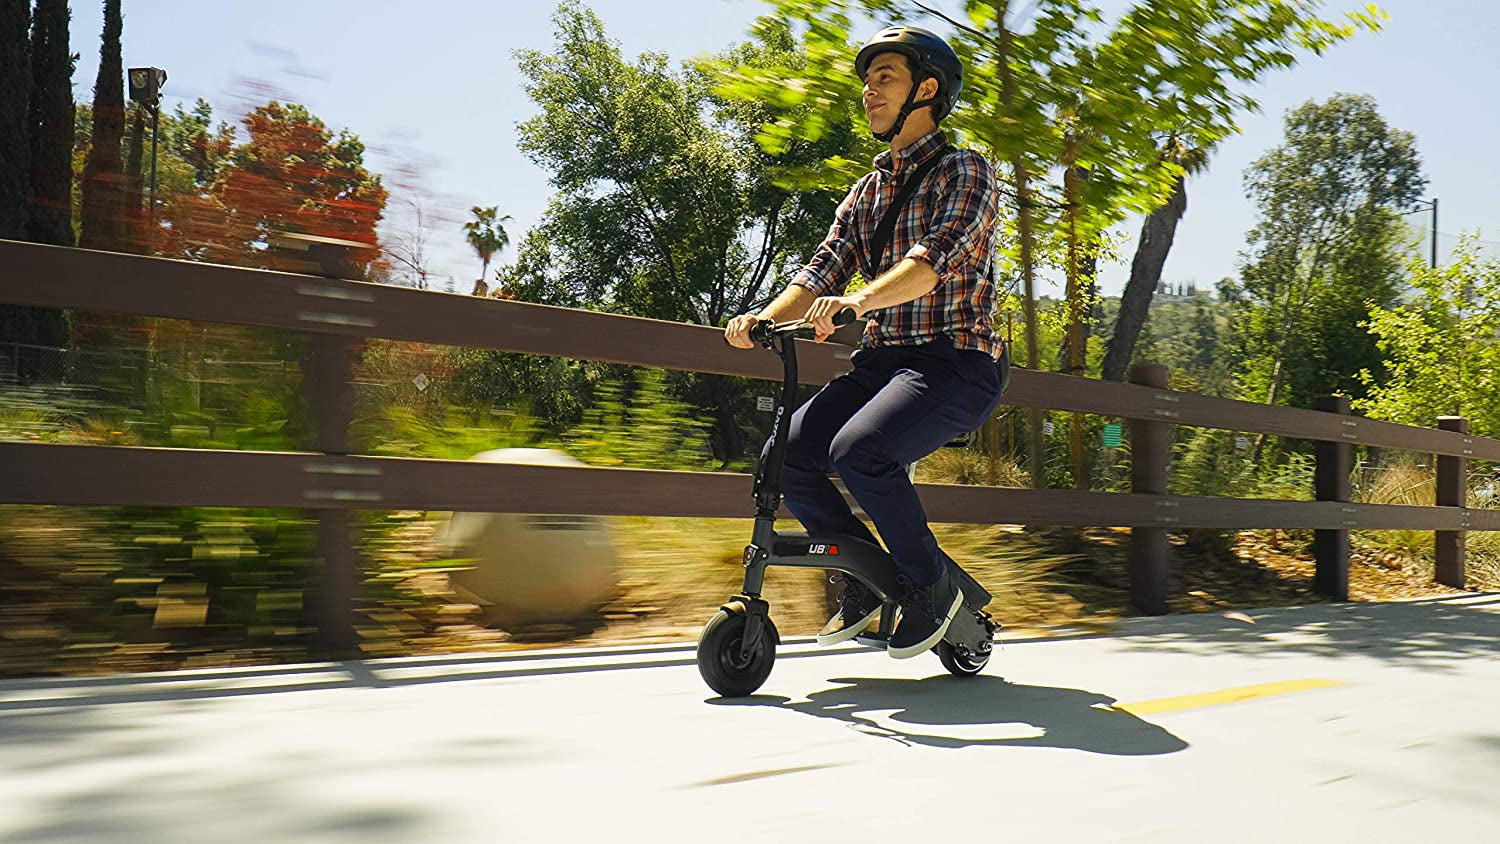 UB1 Seated Electric Scooter - 8" Air Filled Front Tire, Adjustable Seat, Lightweight and Compact Design, 36V Electric Power, 250W Motor, up to 13.5 Mph